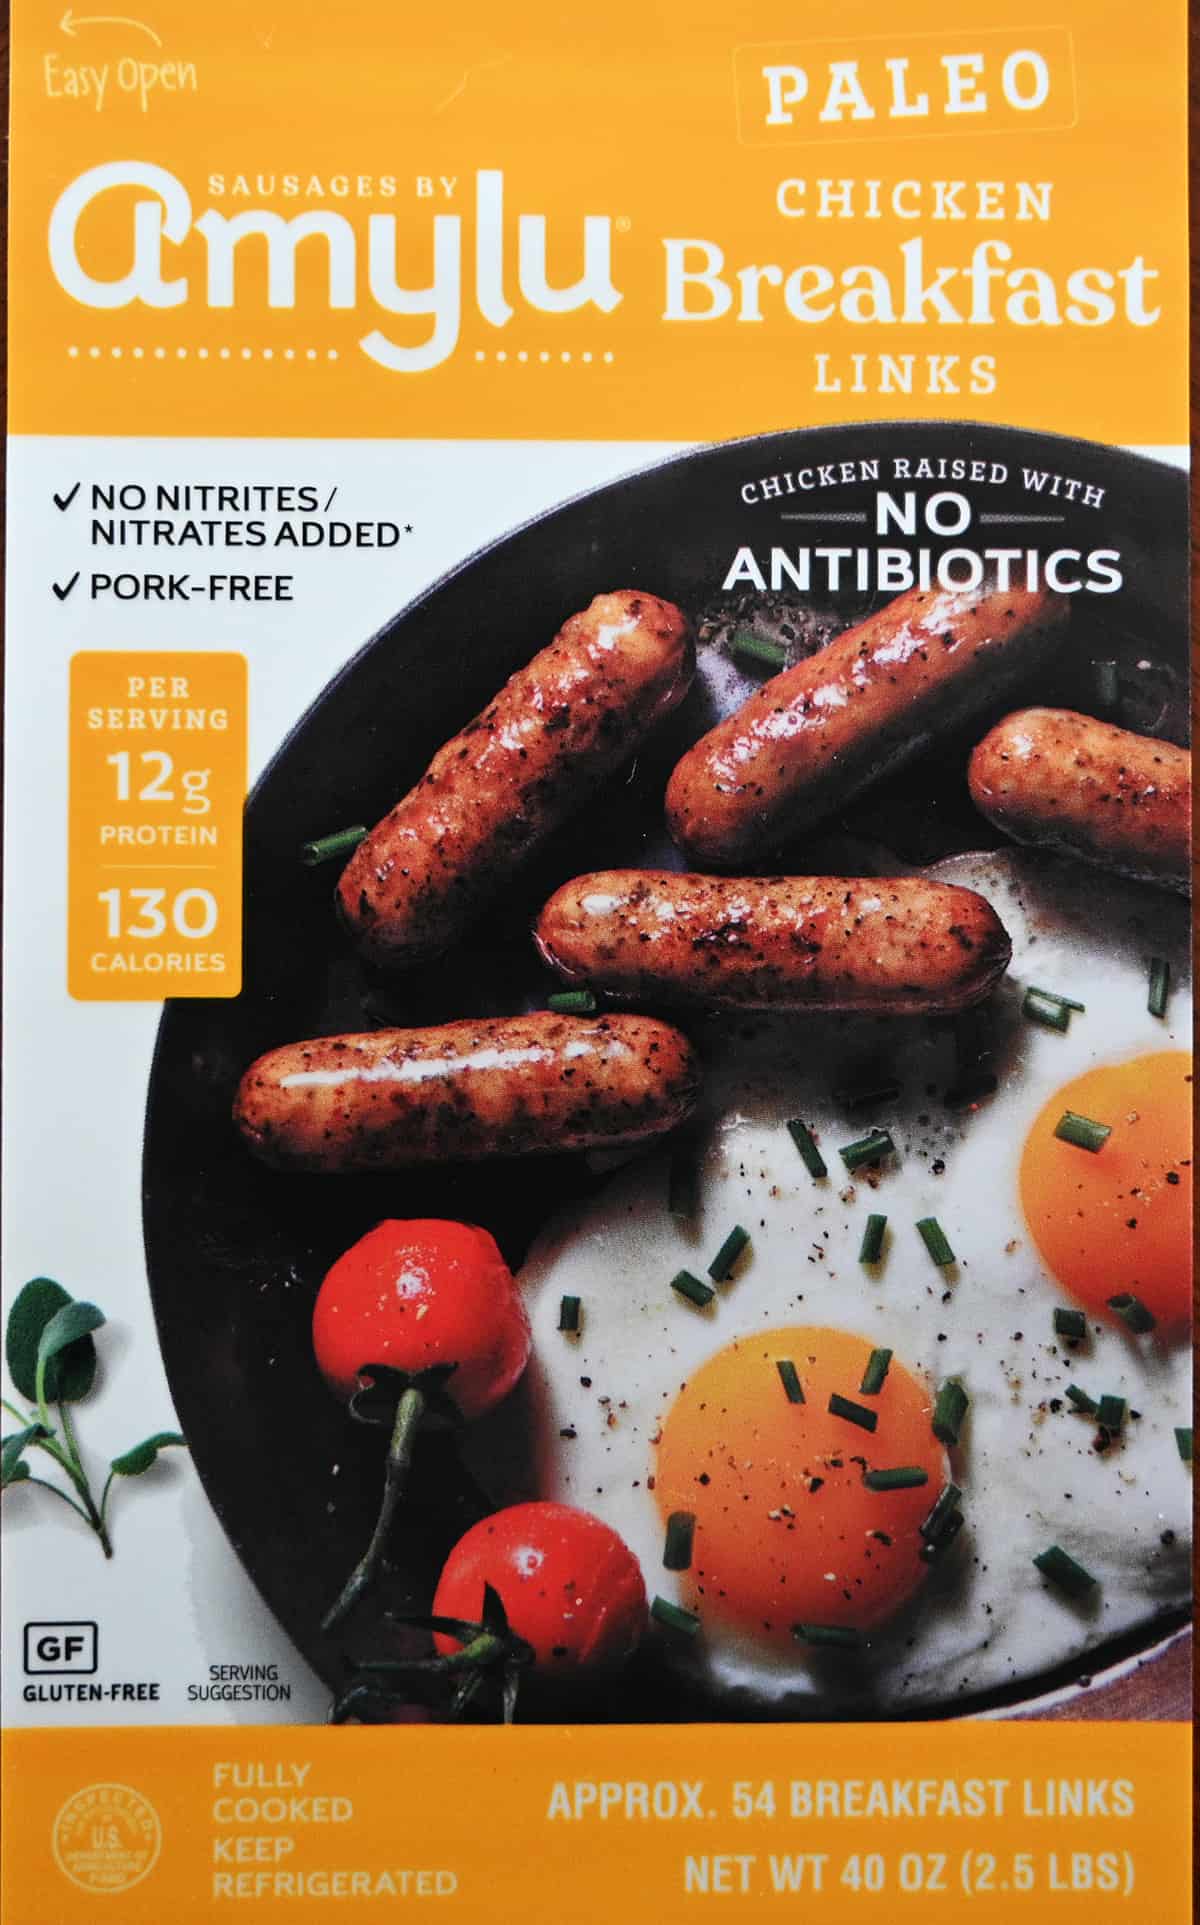 Closeup image of the breakfast links label from the package showing that they're nitrate/nitrite free. 